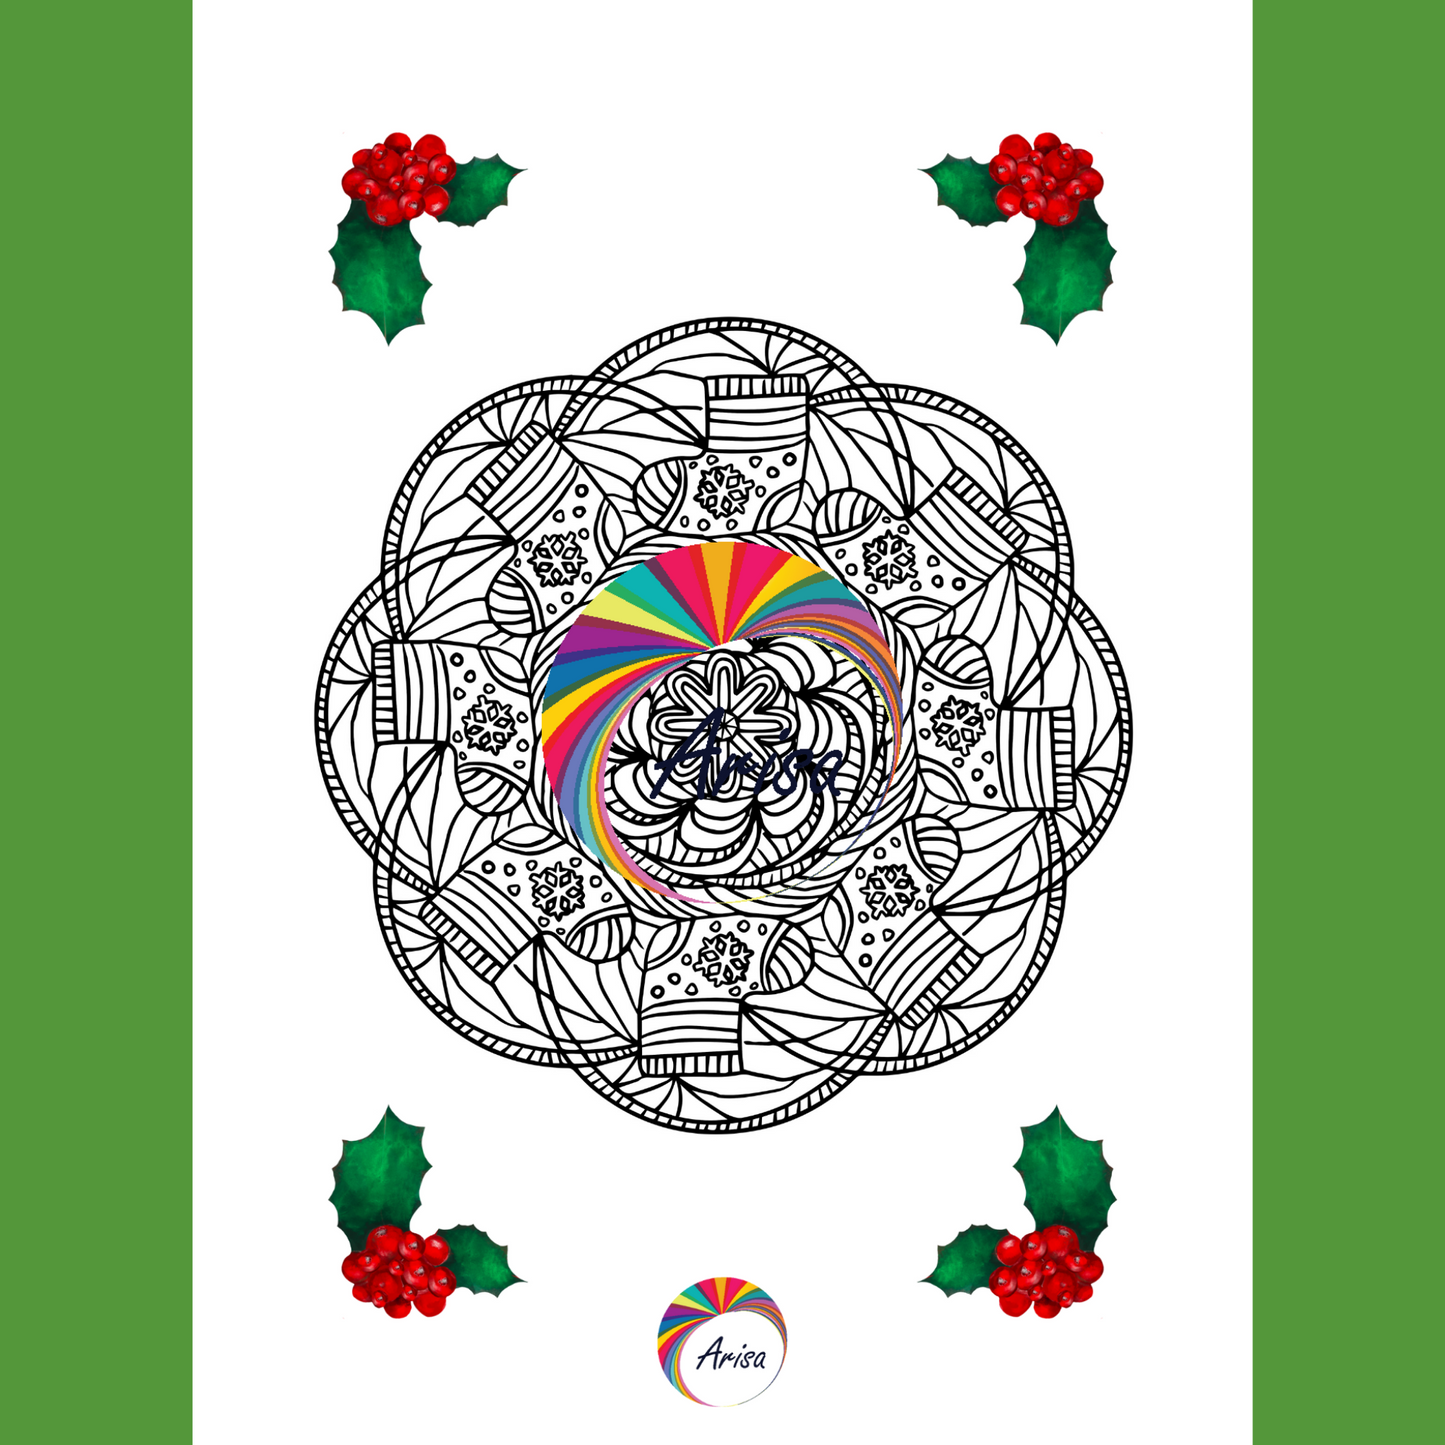 One of the mandalas of the Christmas Joy Mandala Coloring Pages Pack-8.5x11 by ArisaTeam